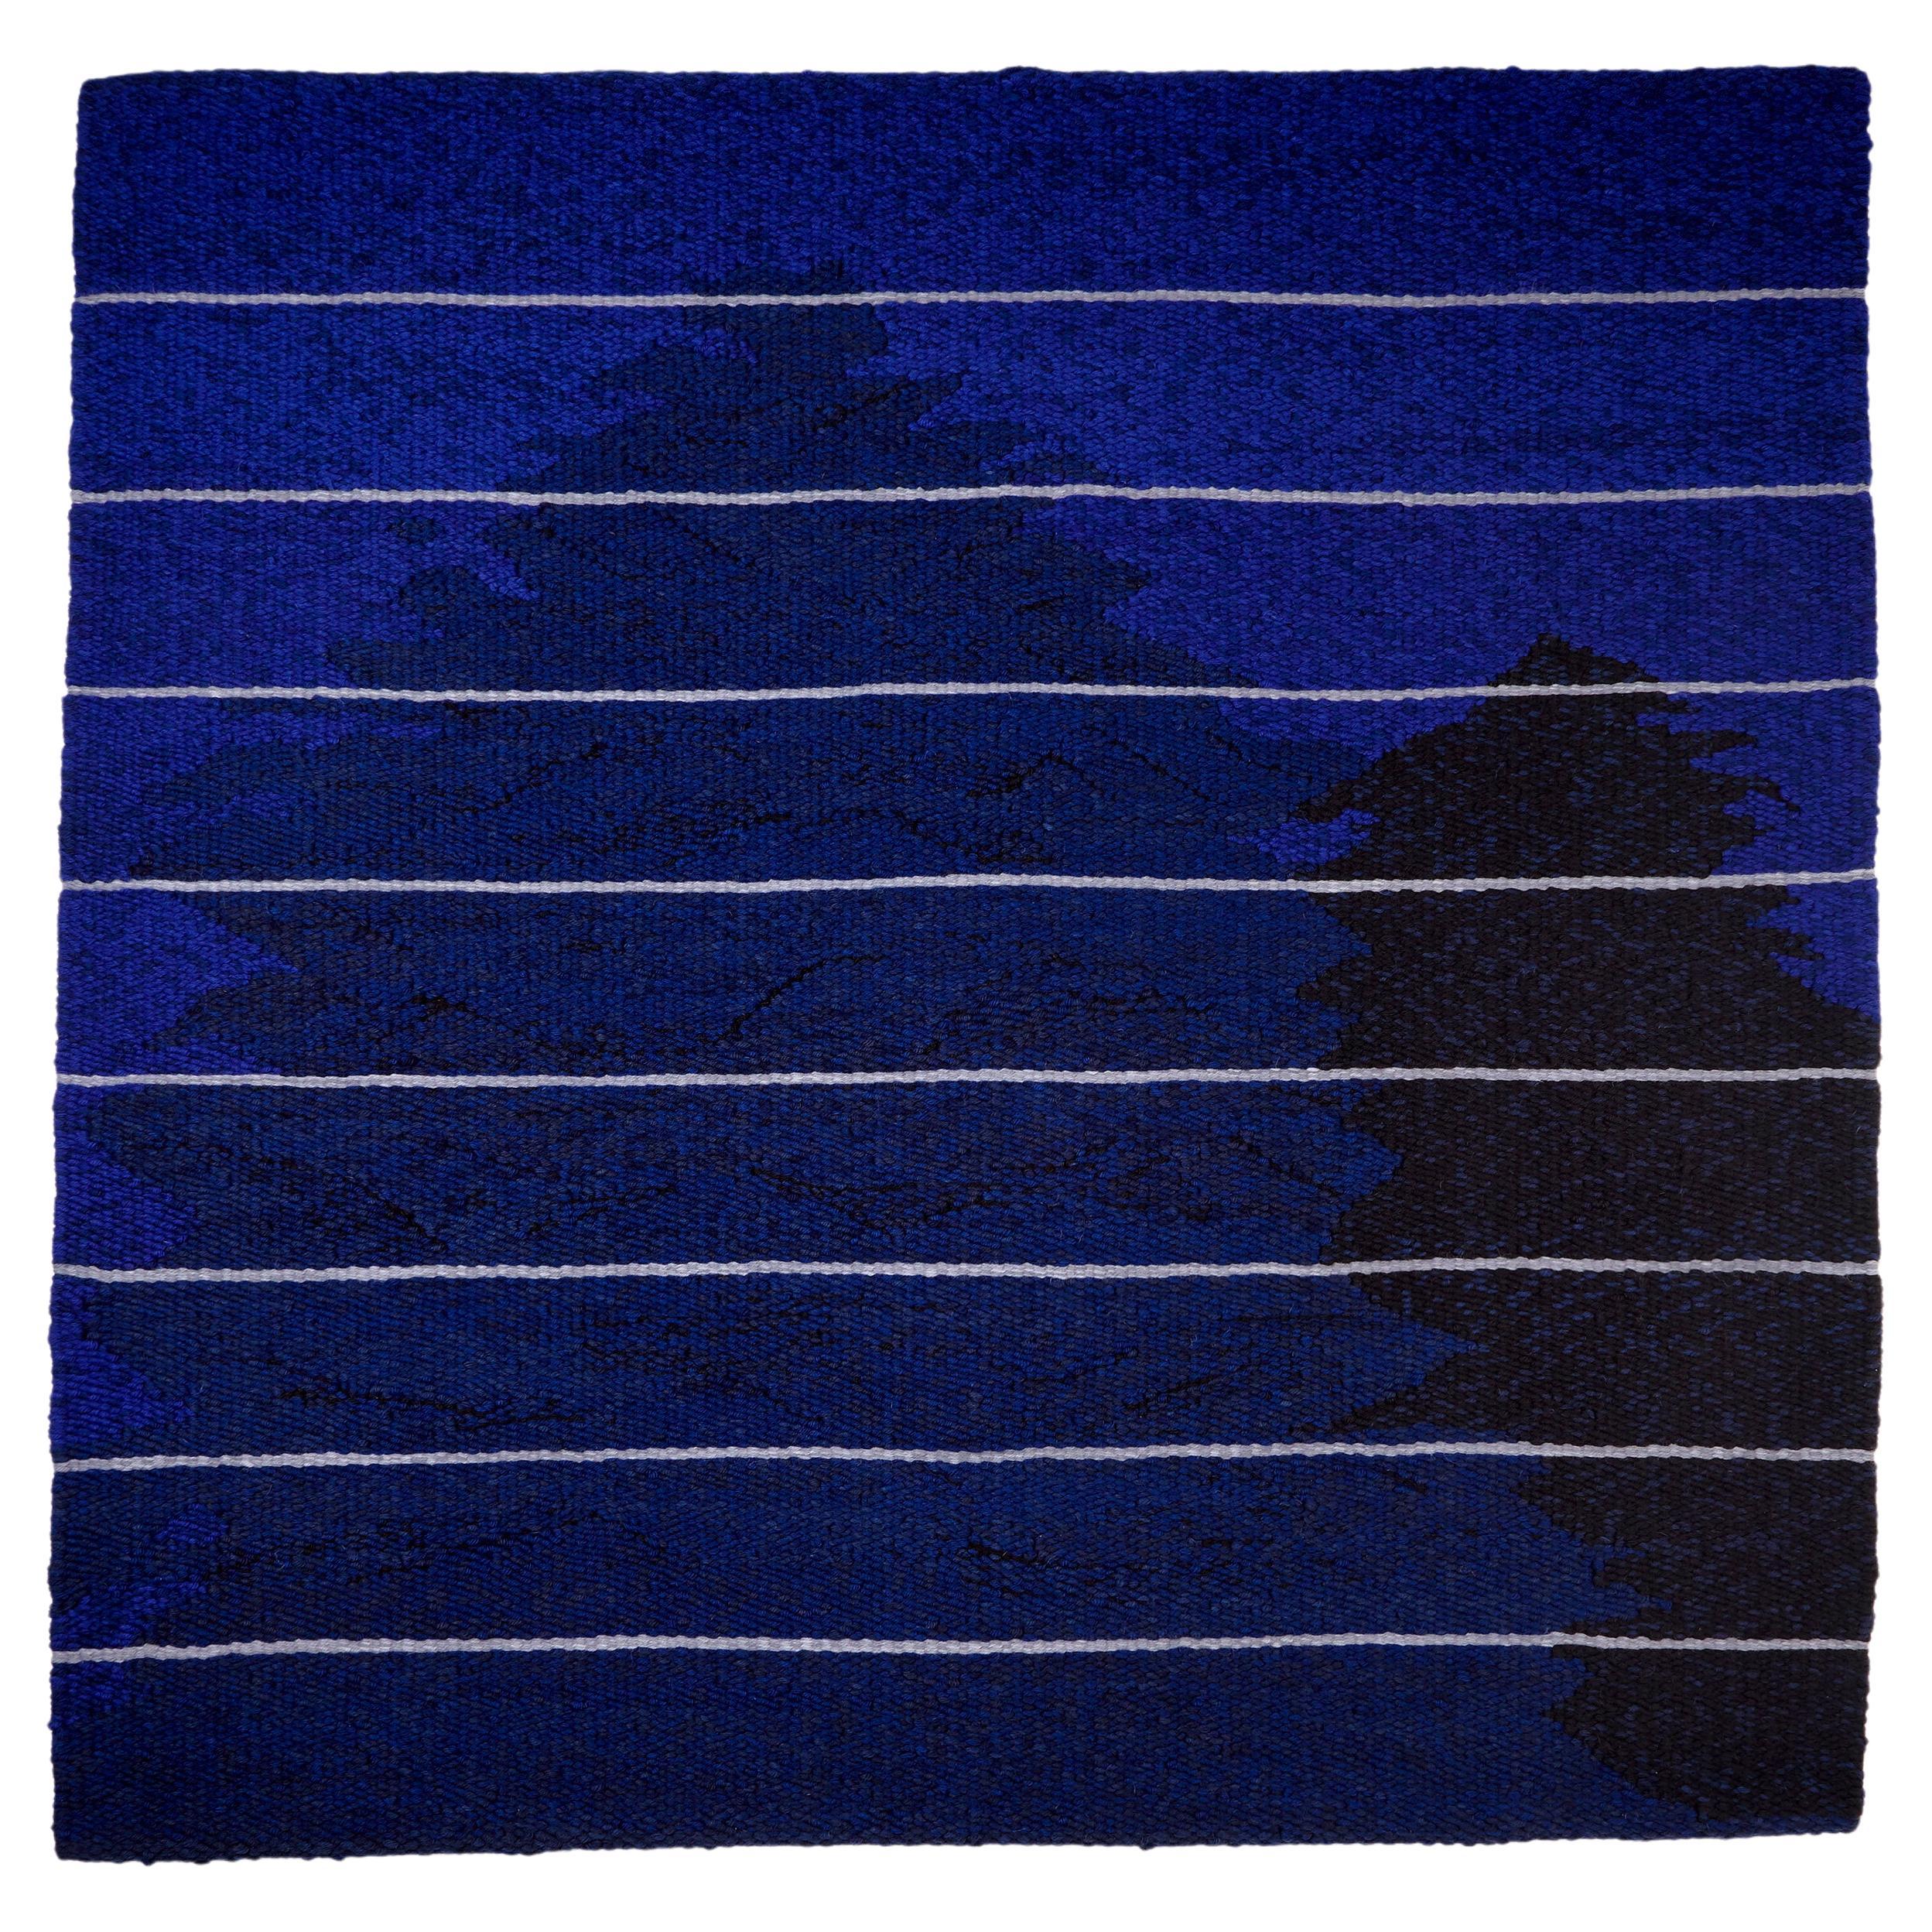 Contemporary Woven Tapestry: Midnight, Moonlight and Shadows For Sale